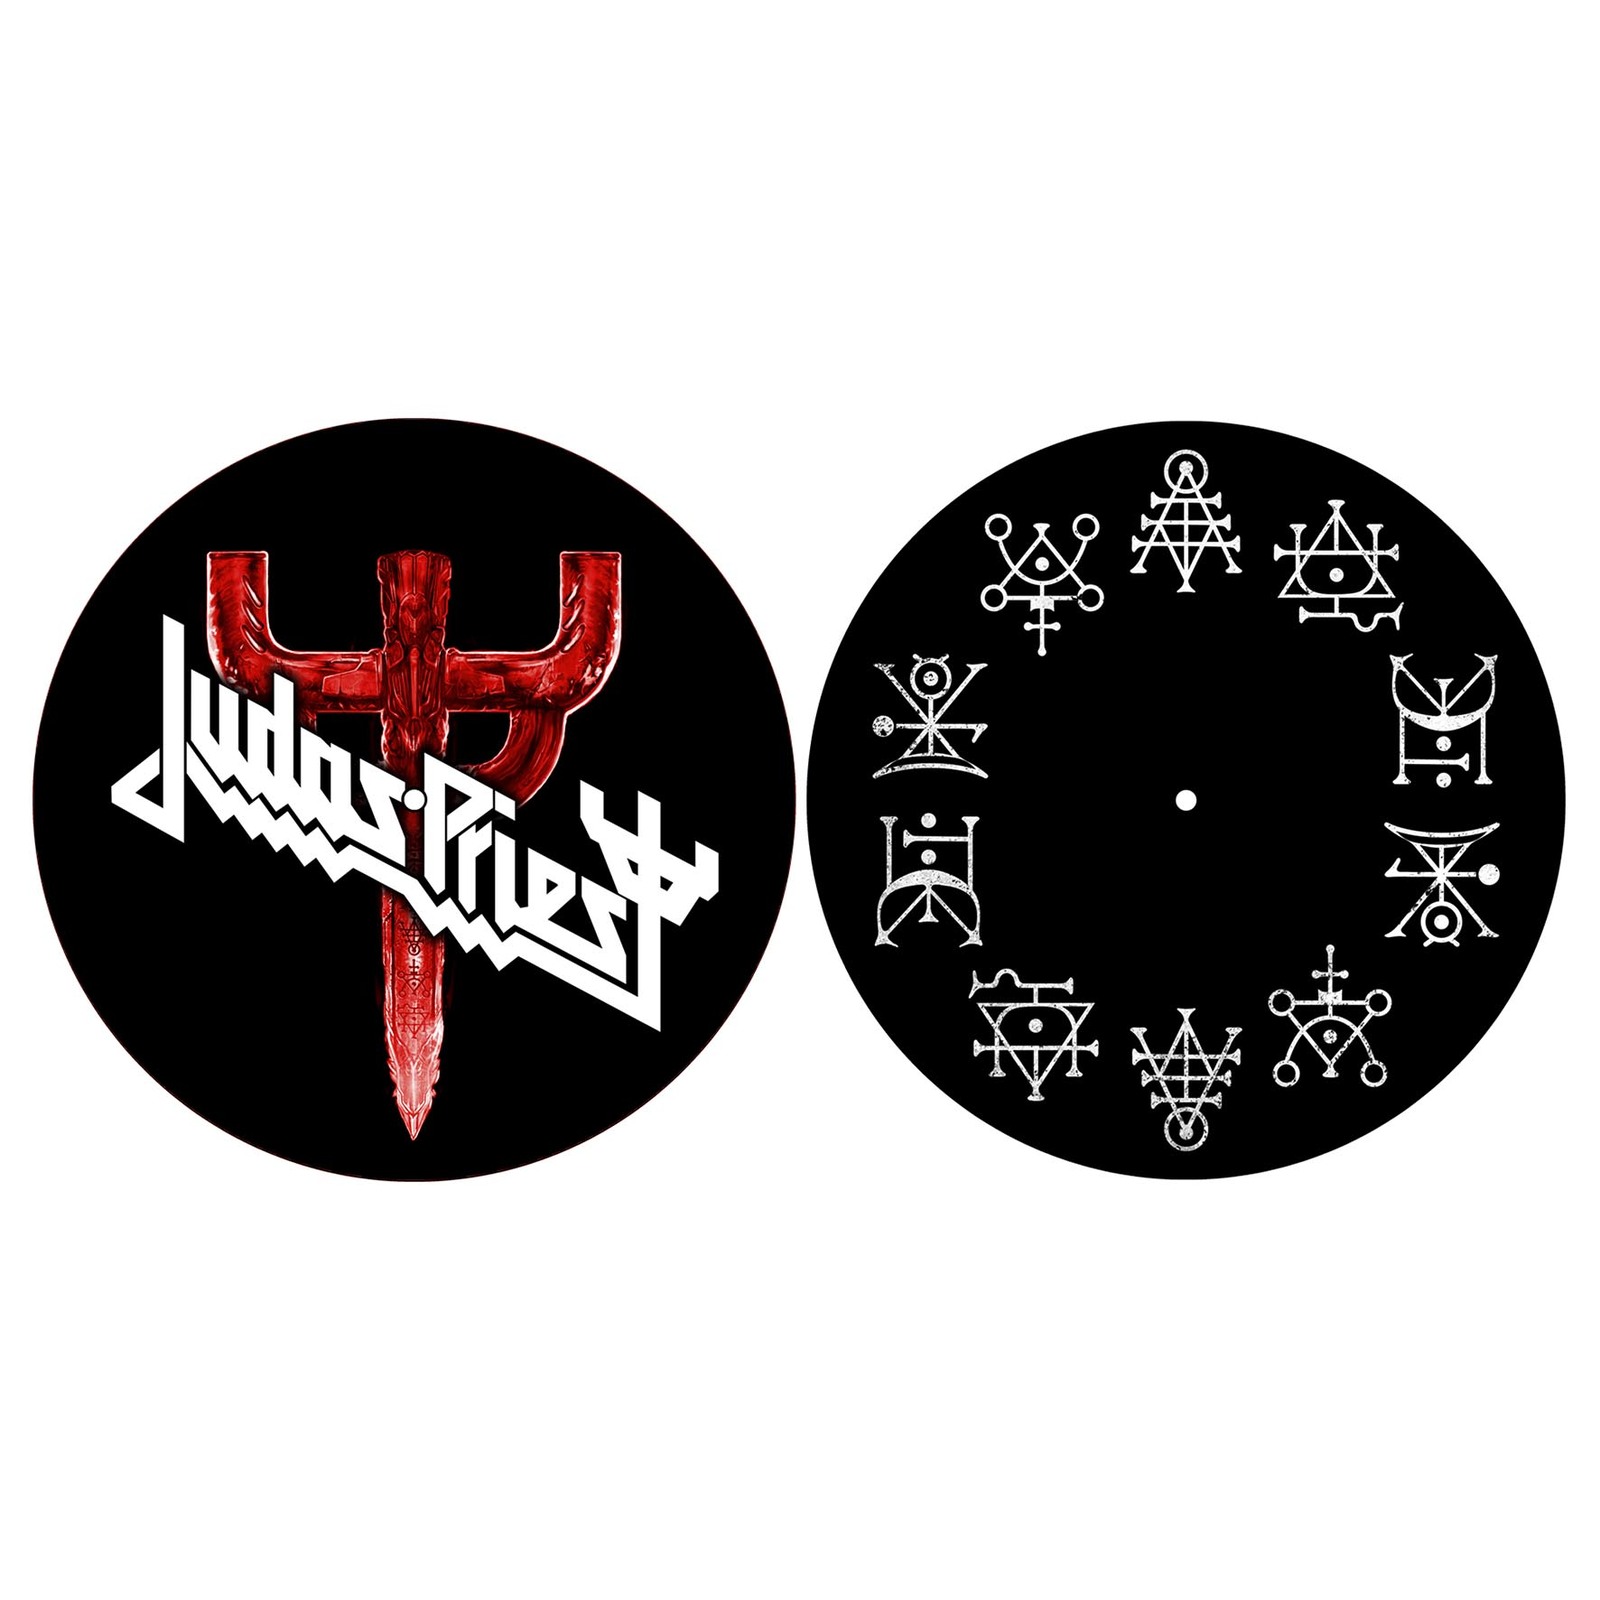 NEW 2 X 5 INCH RED JUDAS PRIEST IRON ON PATCH FREE SHIPPING